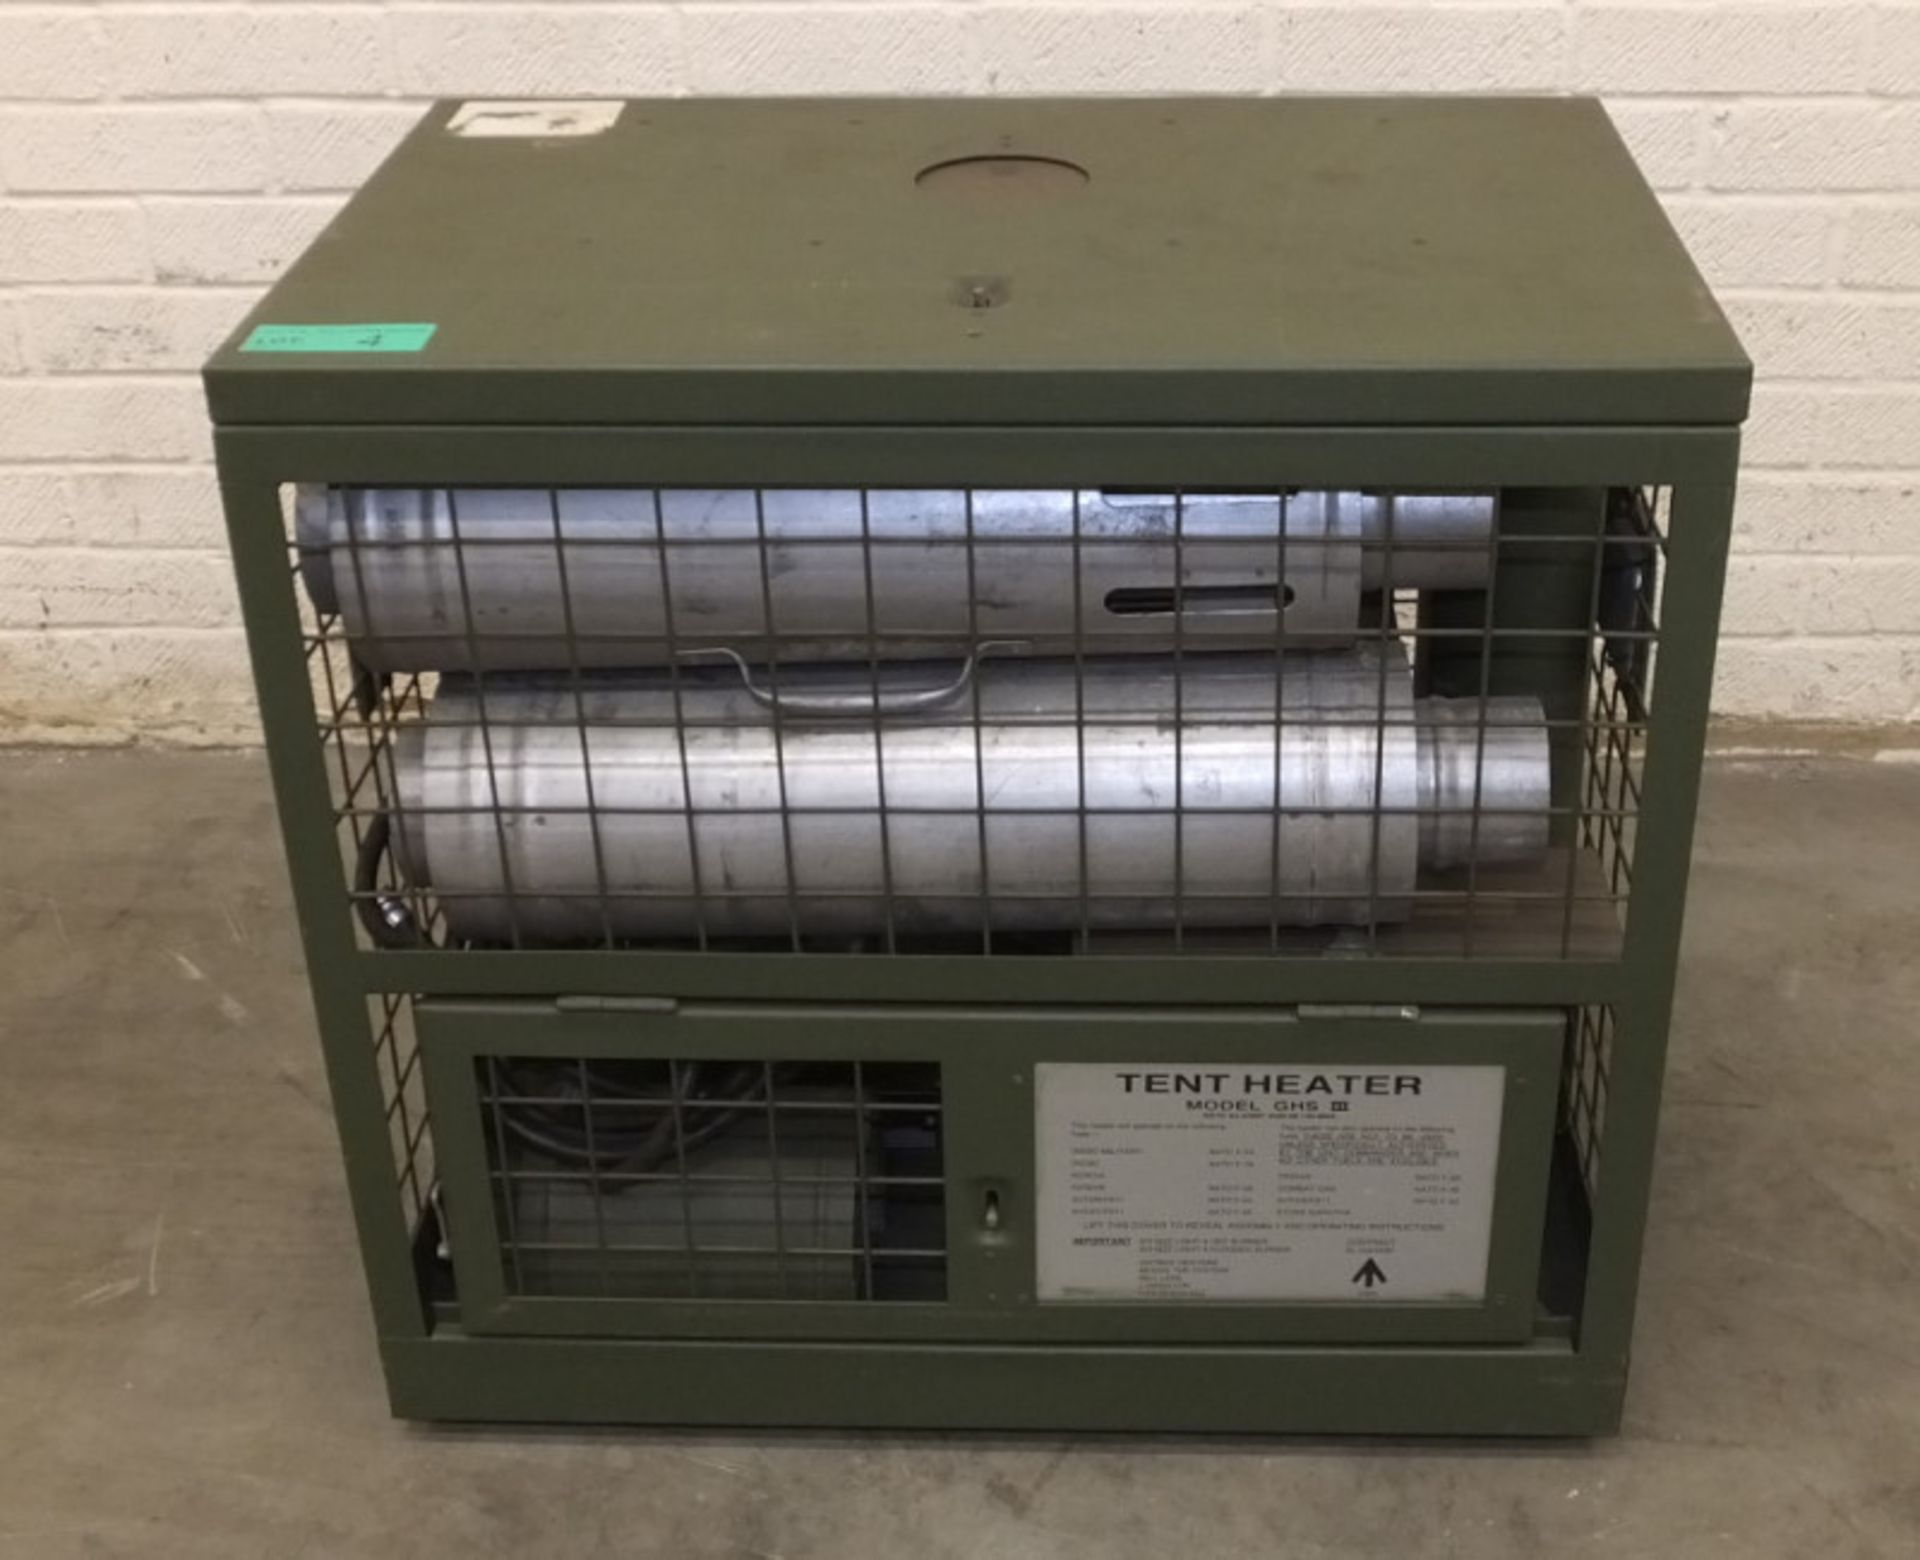 HotBox Heaters Tent Heater GHS III - NSN 4520-99-130-6045 Output - 5-15kW, Ex-MOD specific - Image 10 of 12